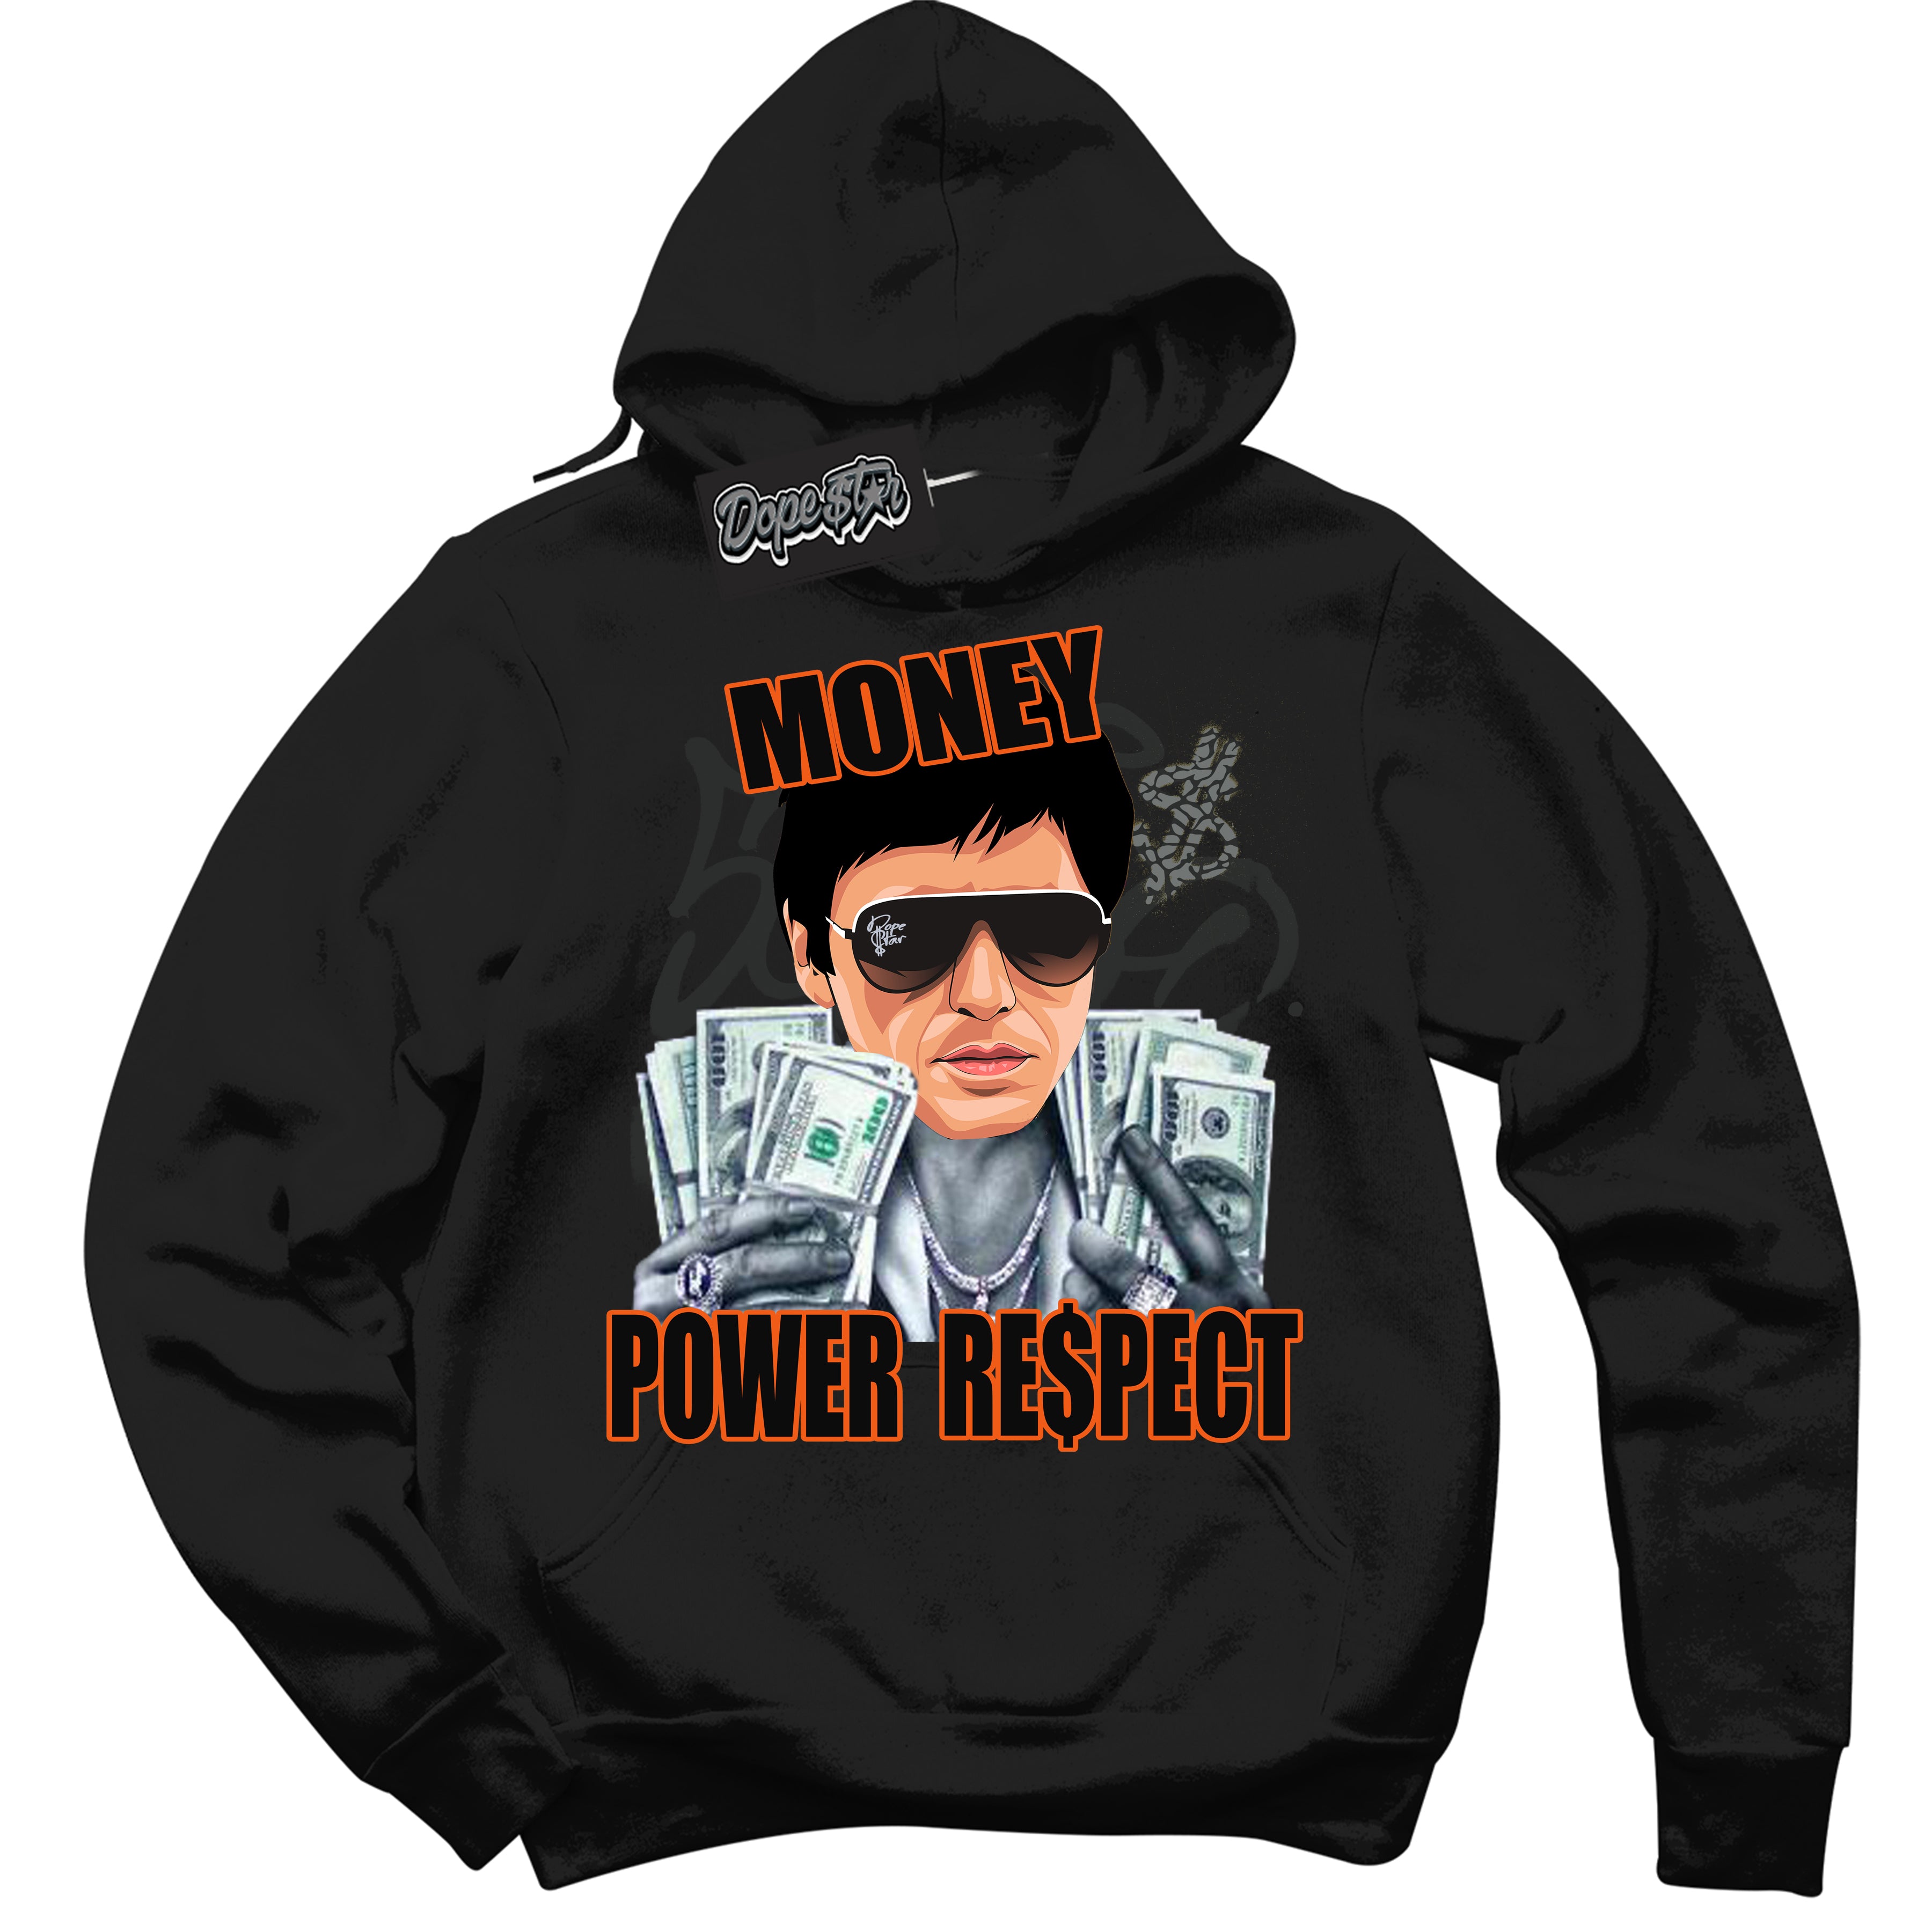 Cool Black Graphic DopeStar Hoodie with “ Tony Montana “ print, that perfectly matches Fear Pack 3s sneakers